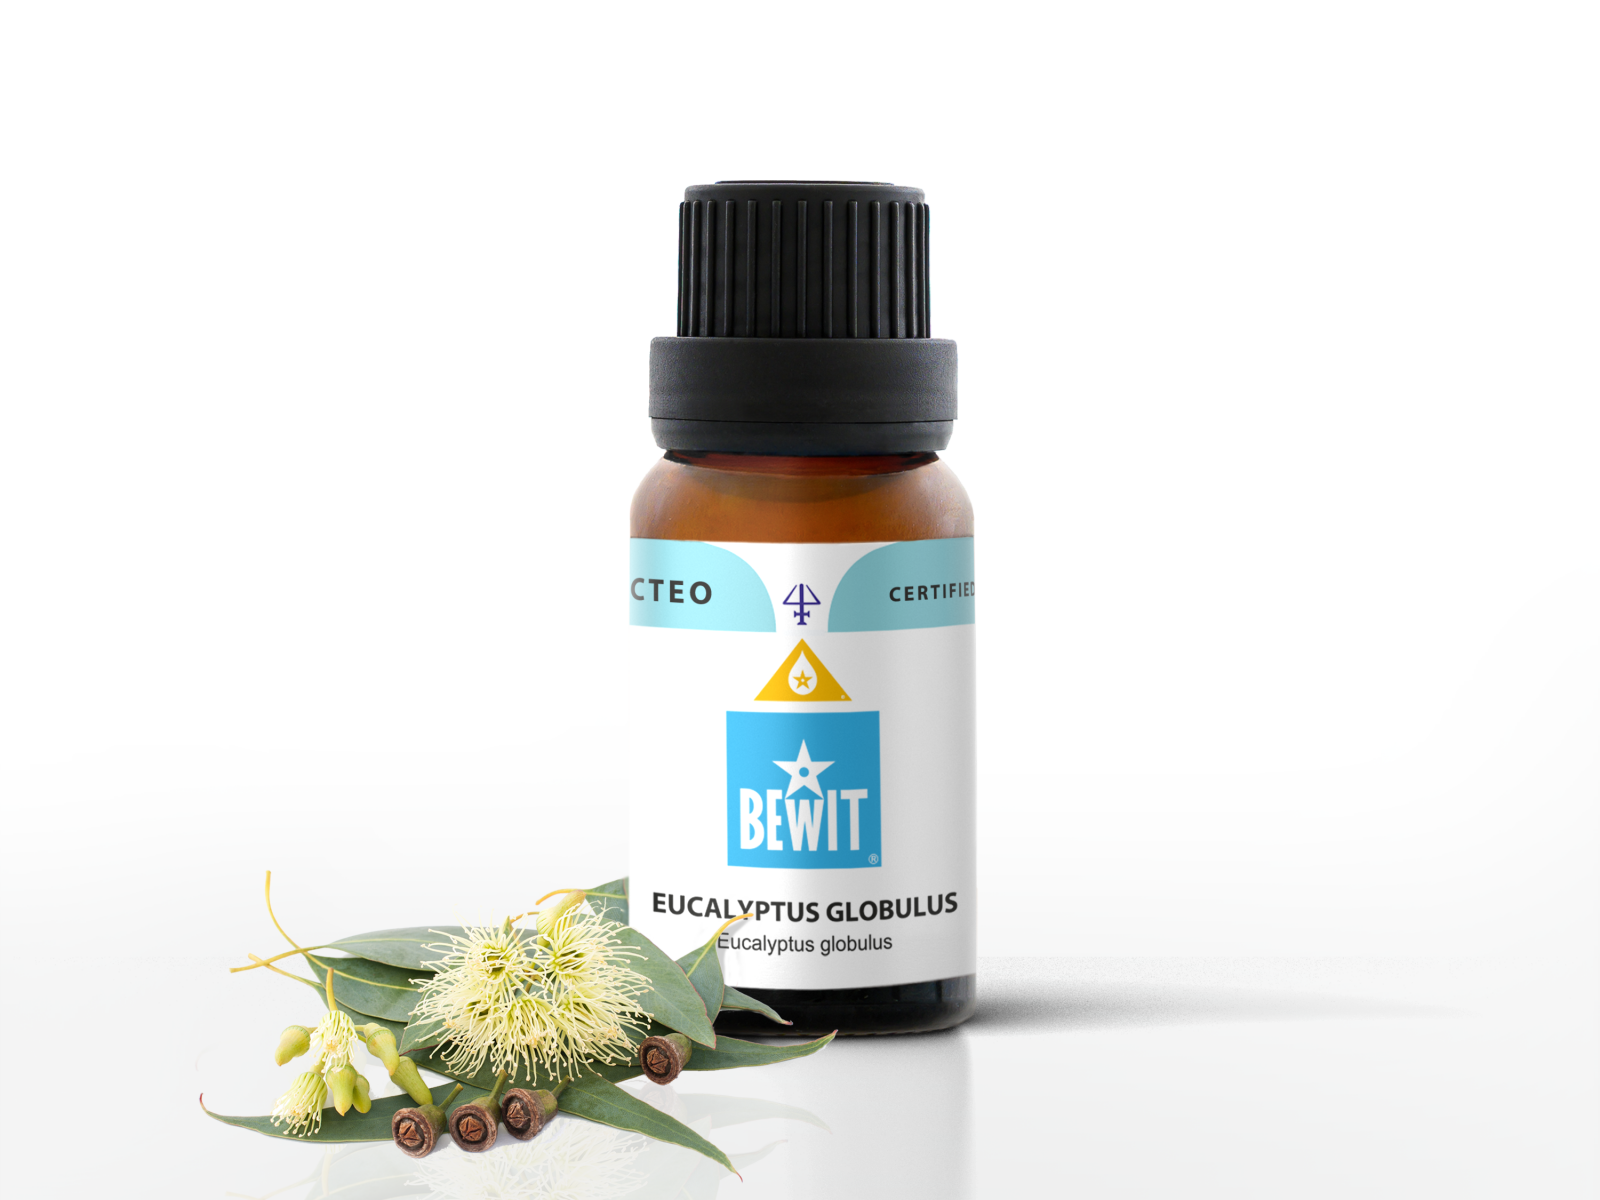 BEWIT Eucalyptus globulus - This is a 100% pure essential oil